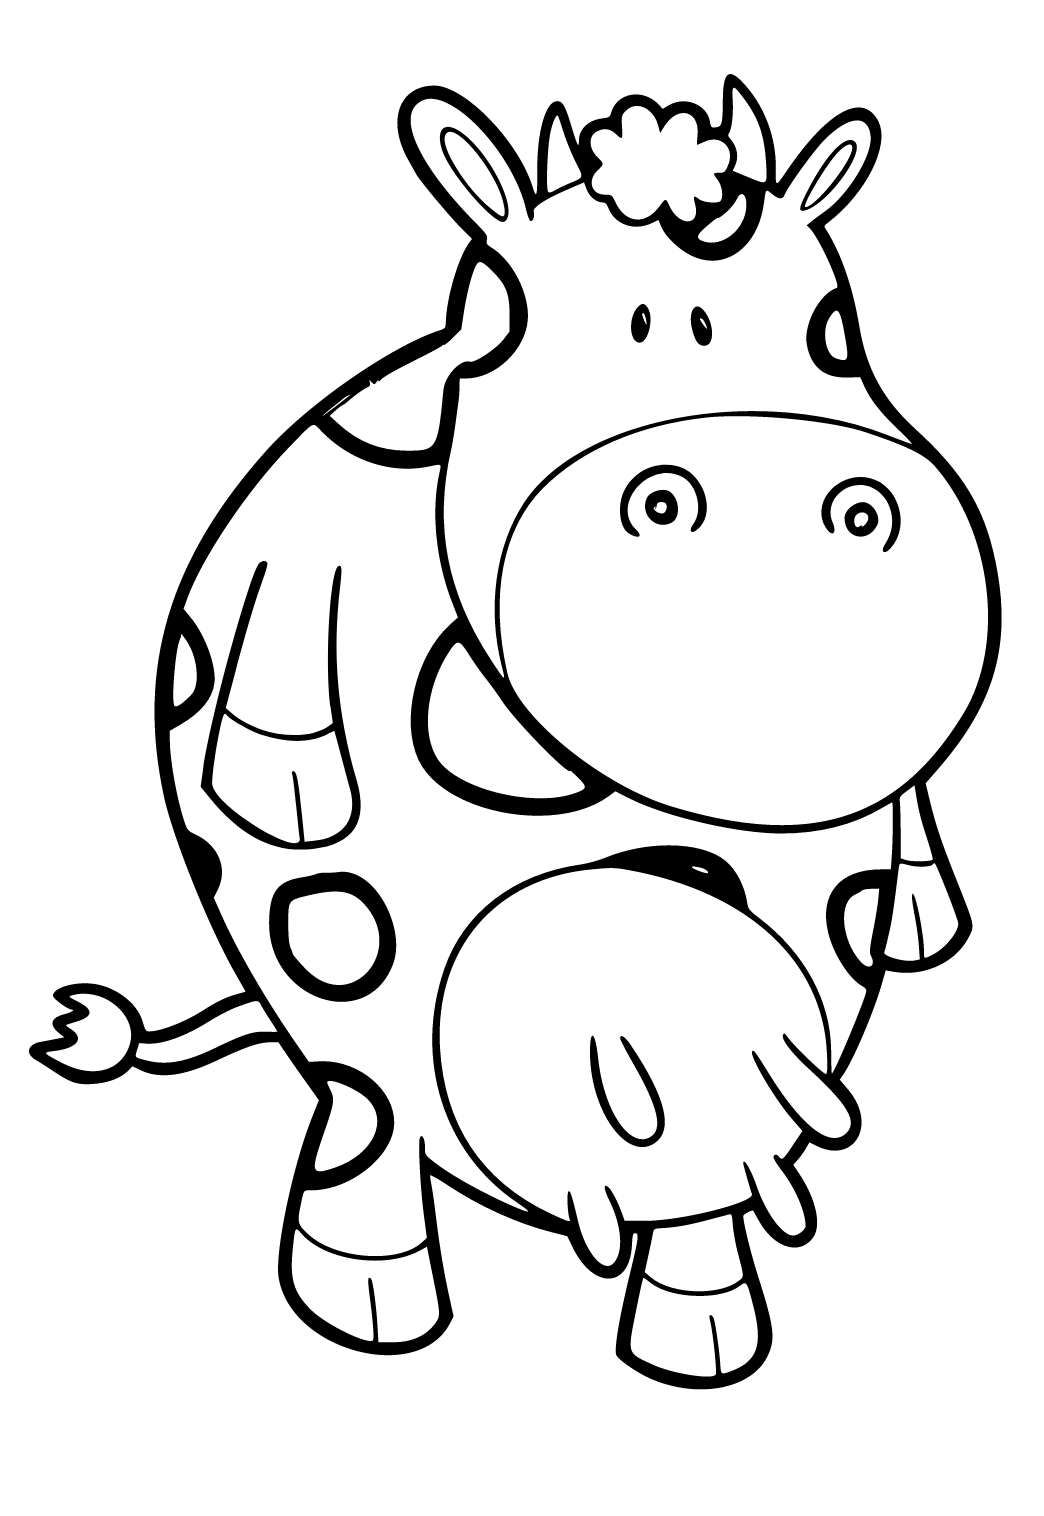 Free printable cow funny coloring page for adults and kids